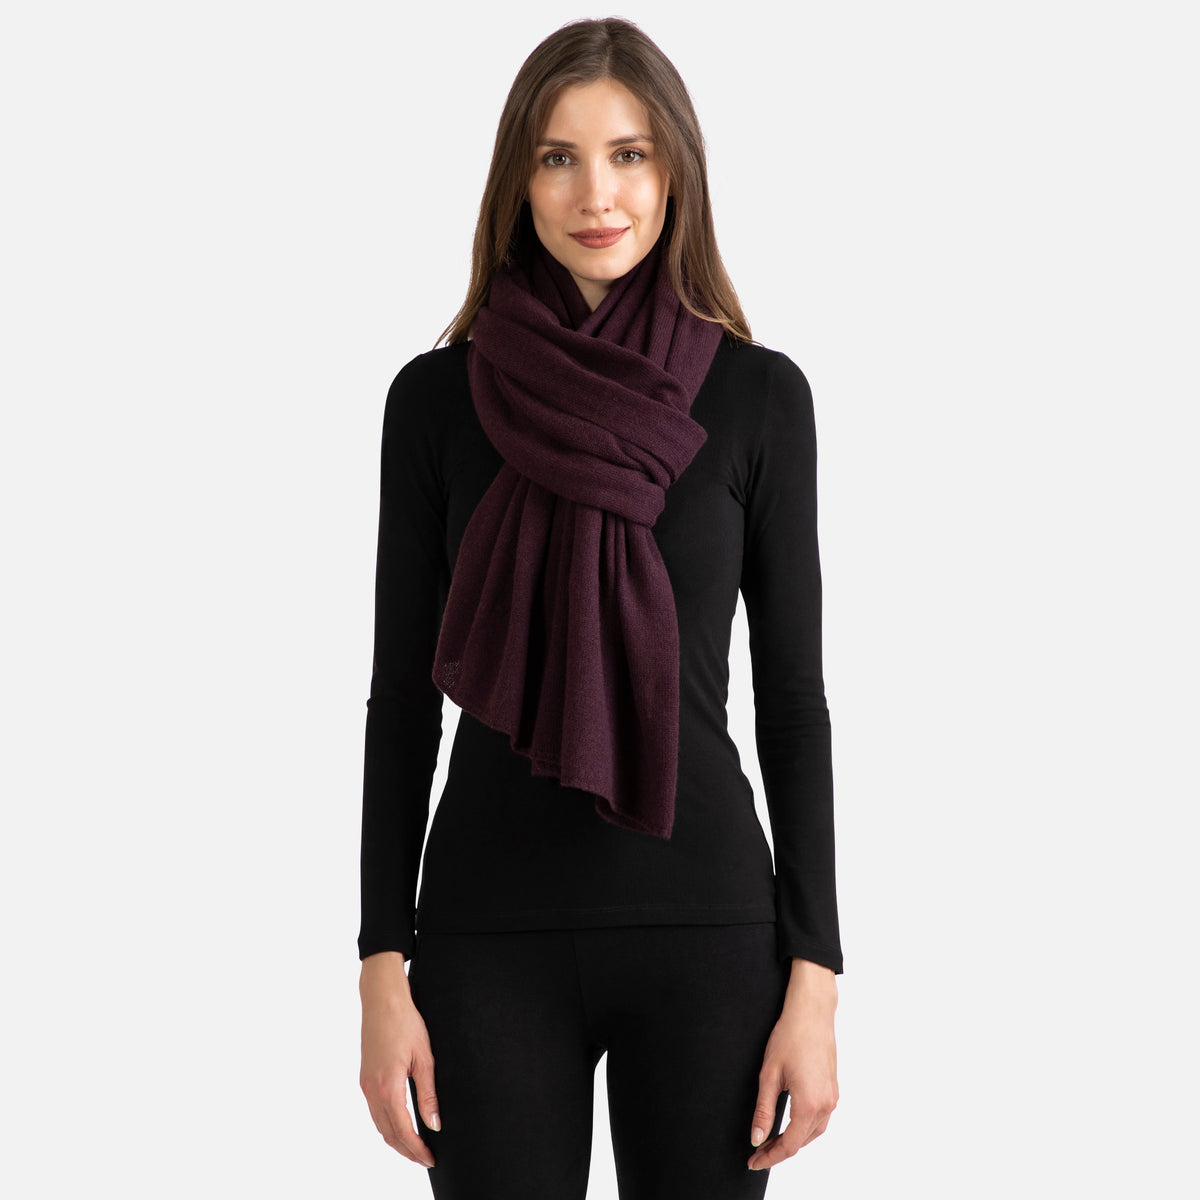 Picture of a woman wearing a dark burgundy  cashmere jersey knitted oversize scarf or travel wrap.